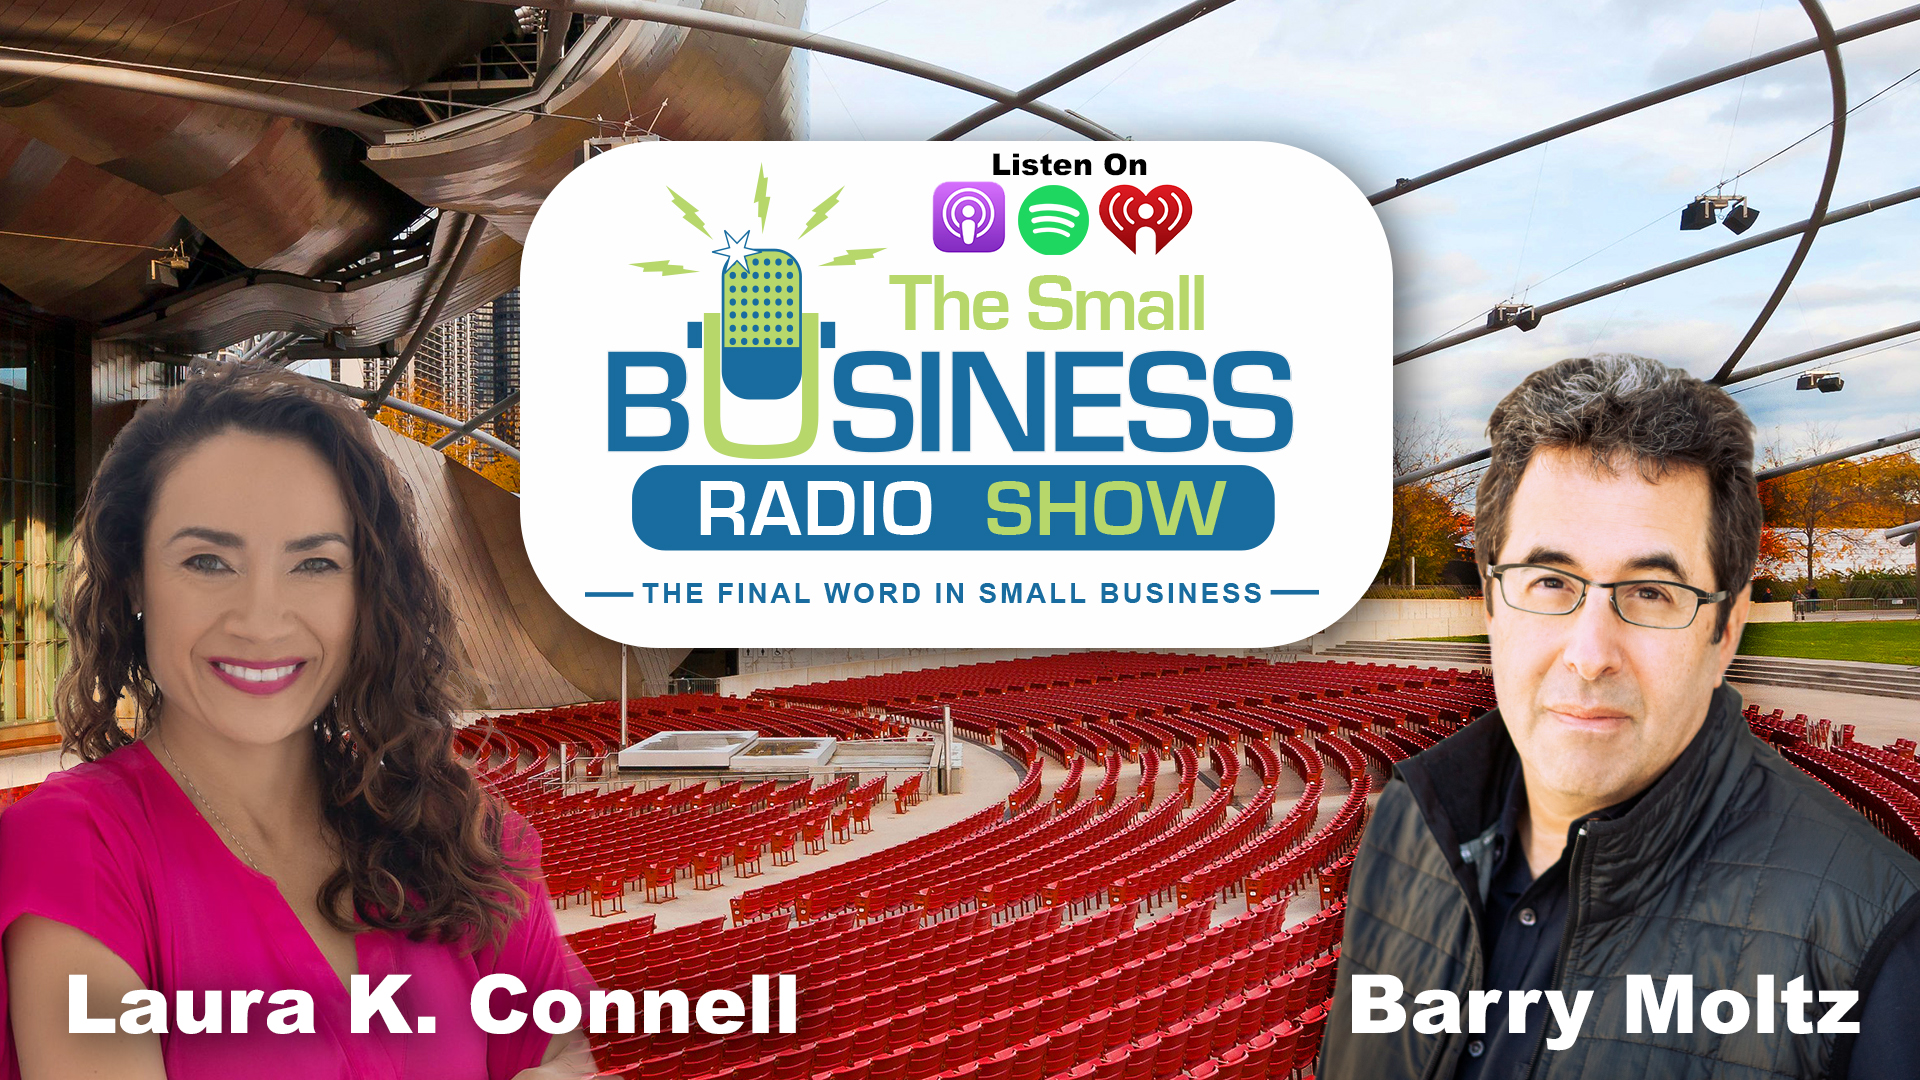 Laura K. Connell on The Small Business Radio Show